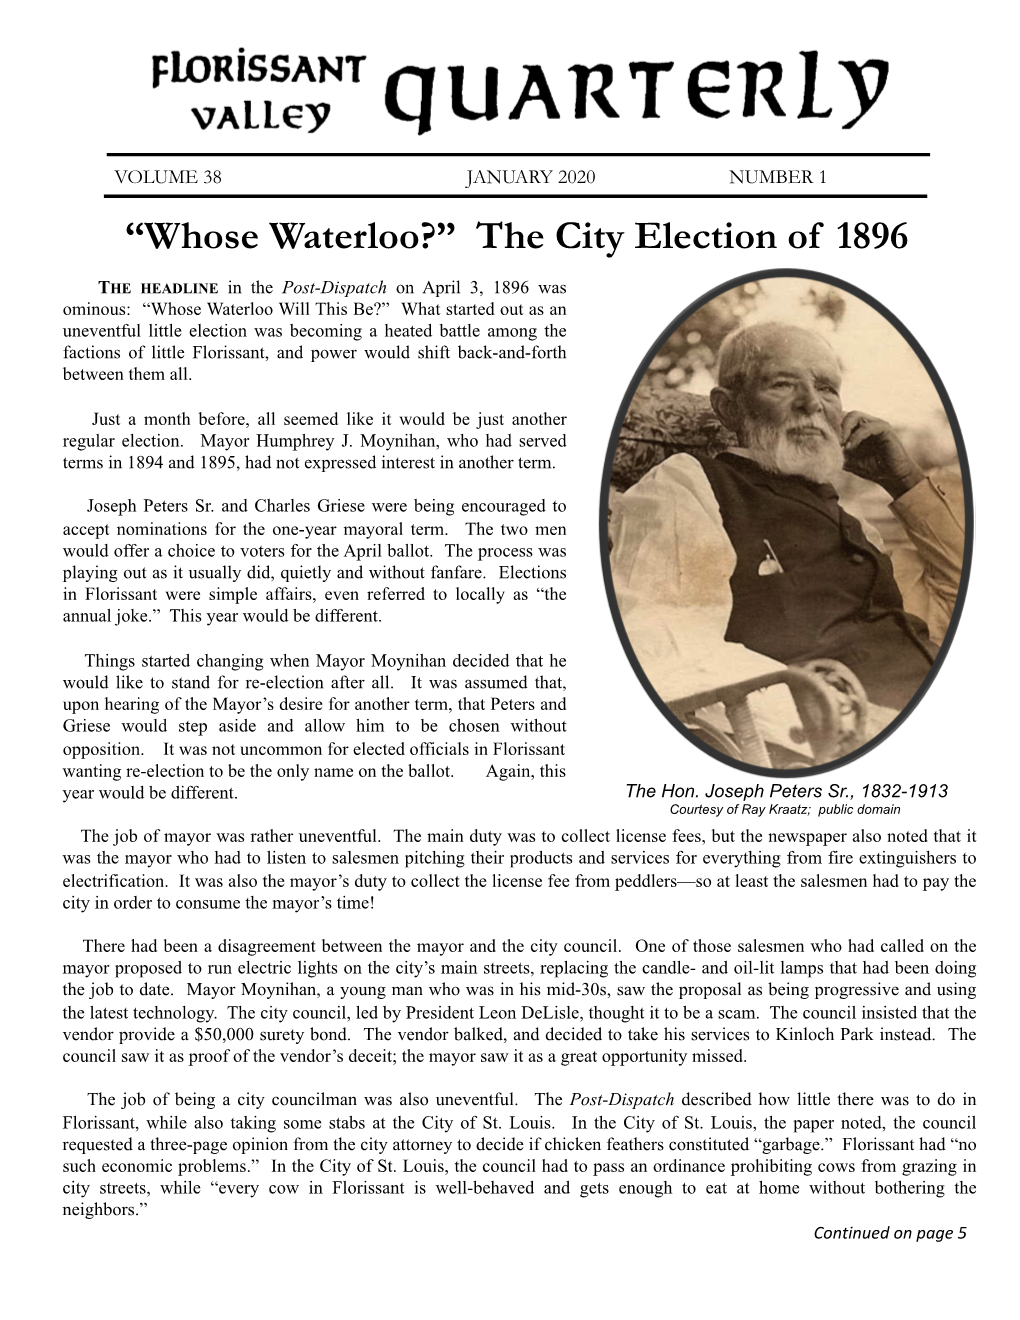 “Whose Waterloo?” the City Election of 1896